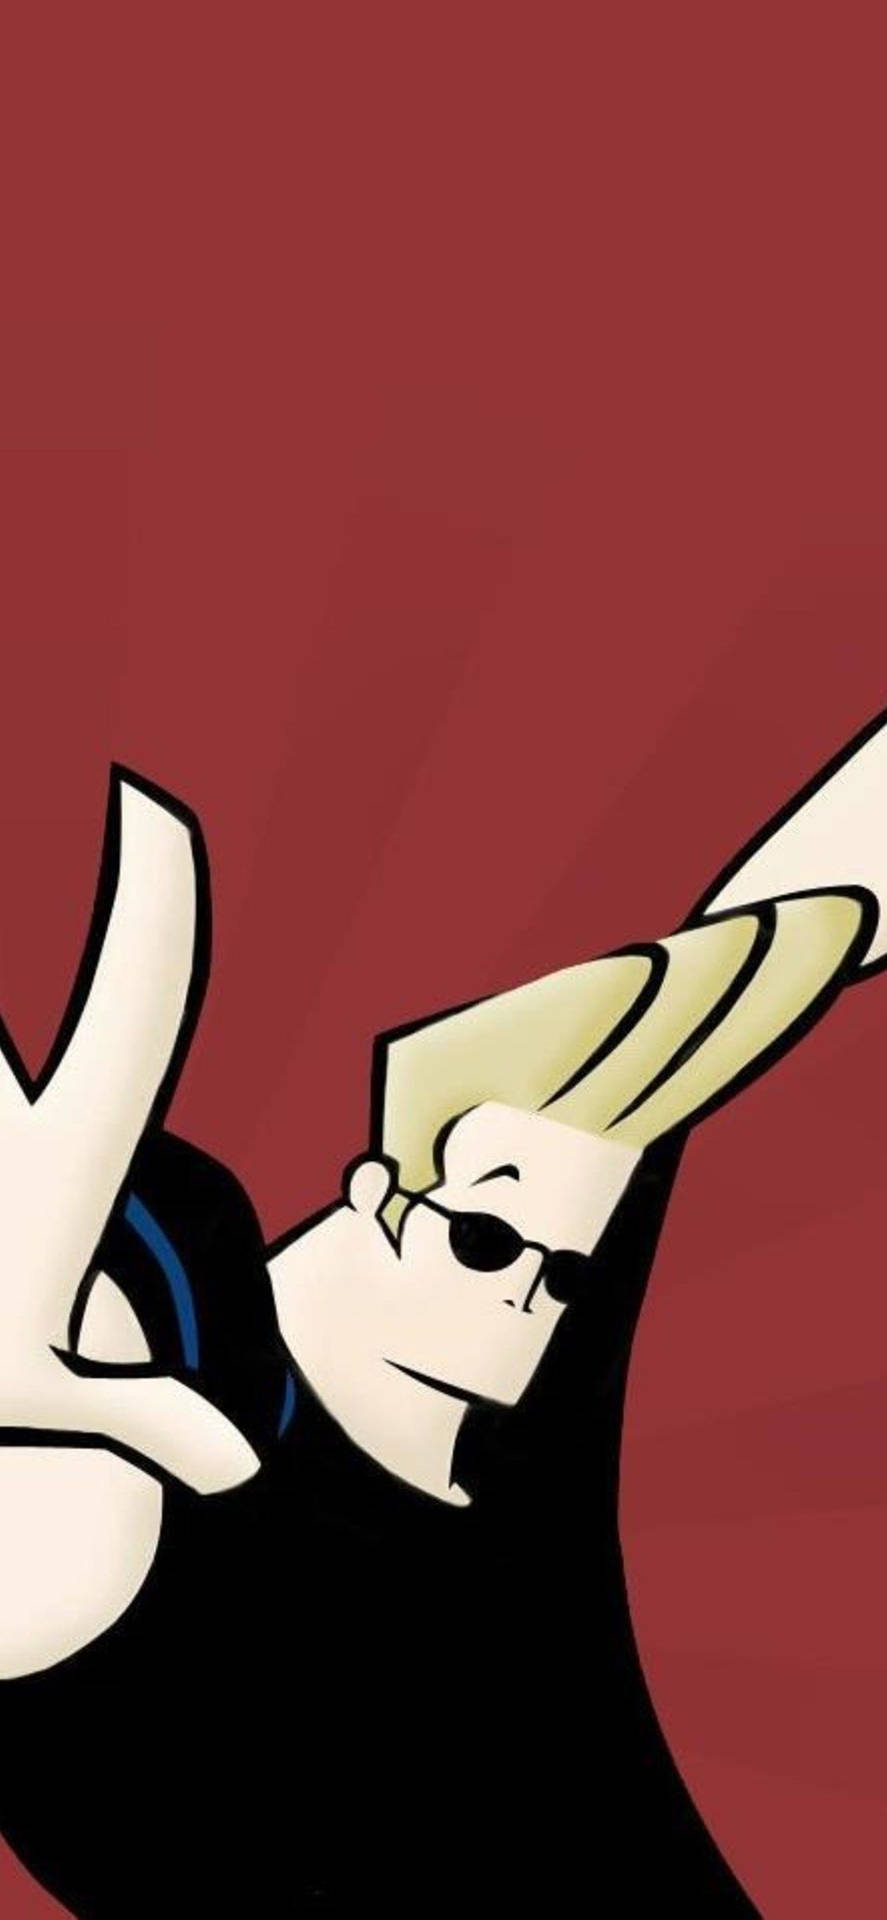 Johnny Bravo Striking A Pose In His Classic Style Wallpaper